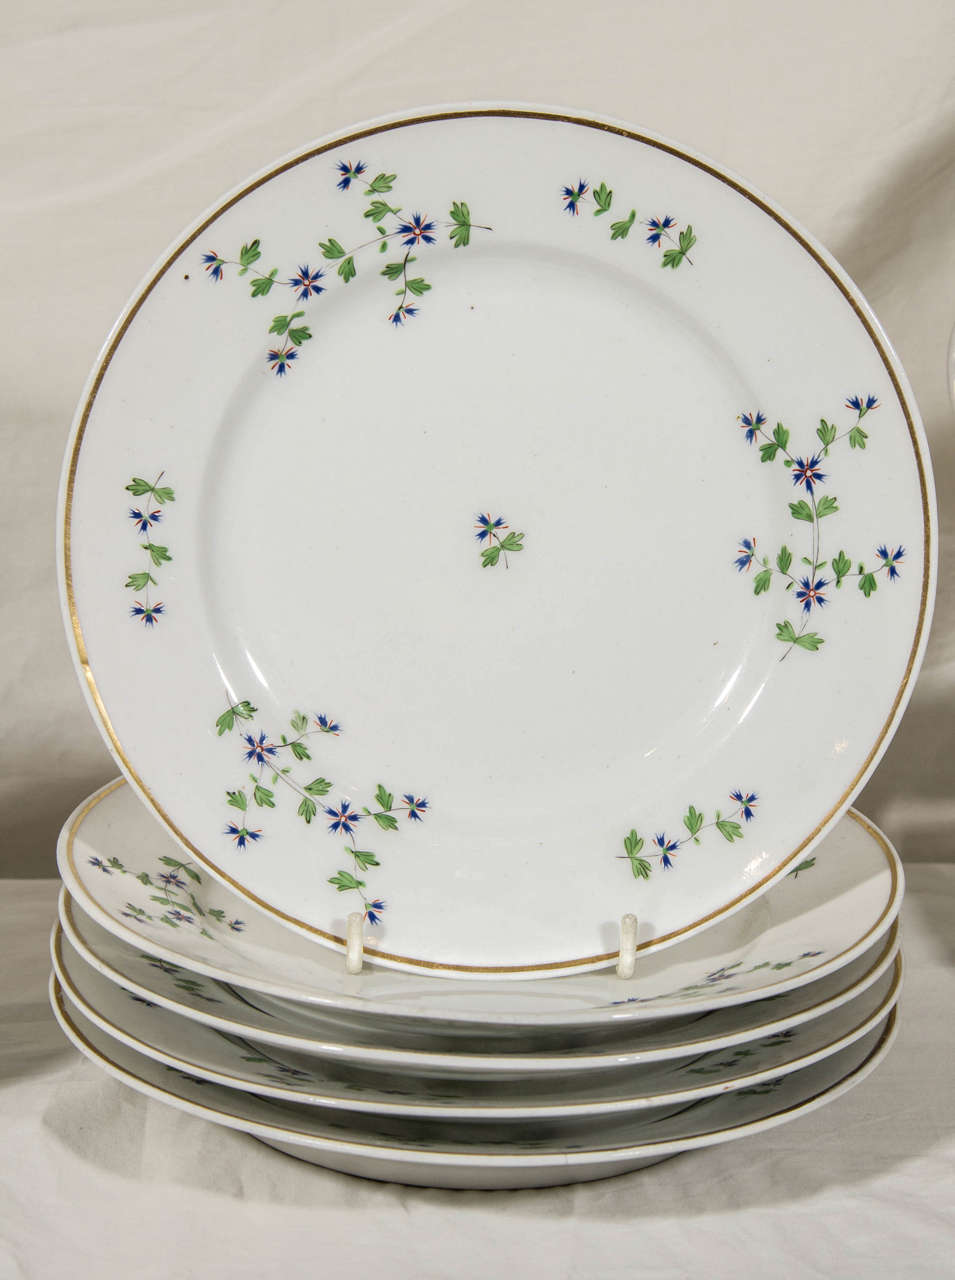 An early 19th century Derby dessert service decorated with a traditional design of cornflower sprigs. Porcelains decorated with a design of cornflower sprigs originated in the 18th century with porcelains made for Queen Marie Antoinette of France.